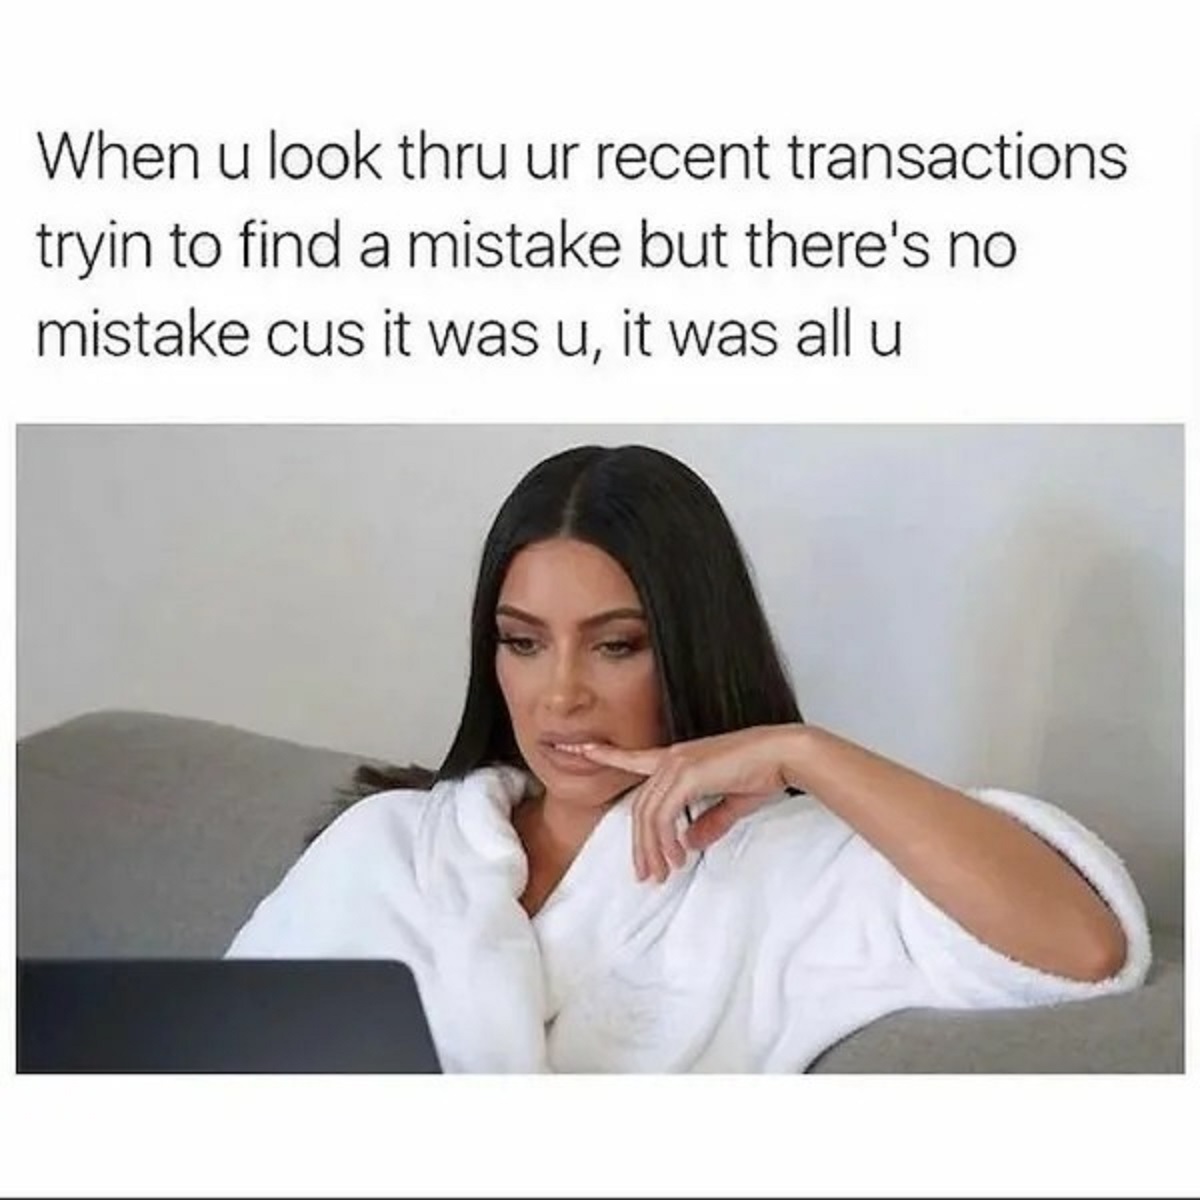 kim kardashian with laptop - When u look thru ur recent transactions tryin to find a mistake but there's no mistake cus it was u, it was all u